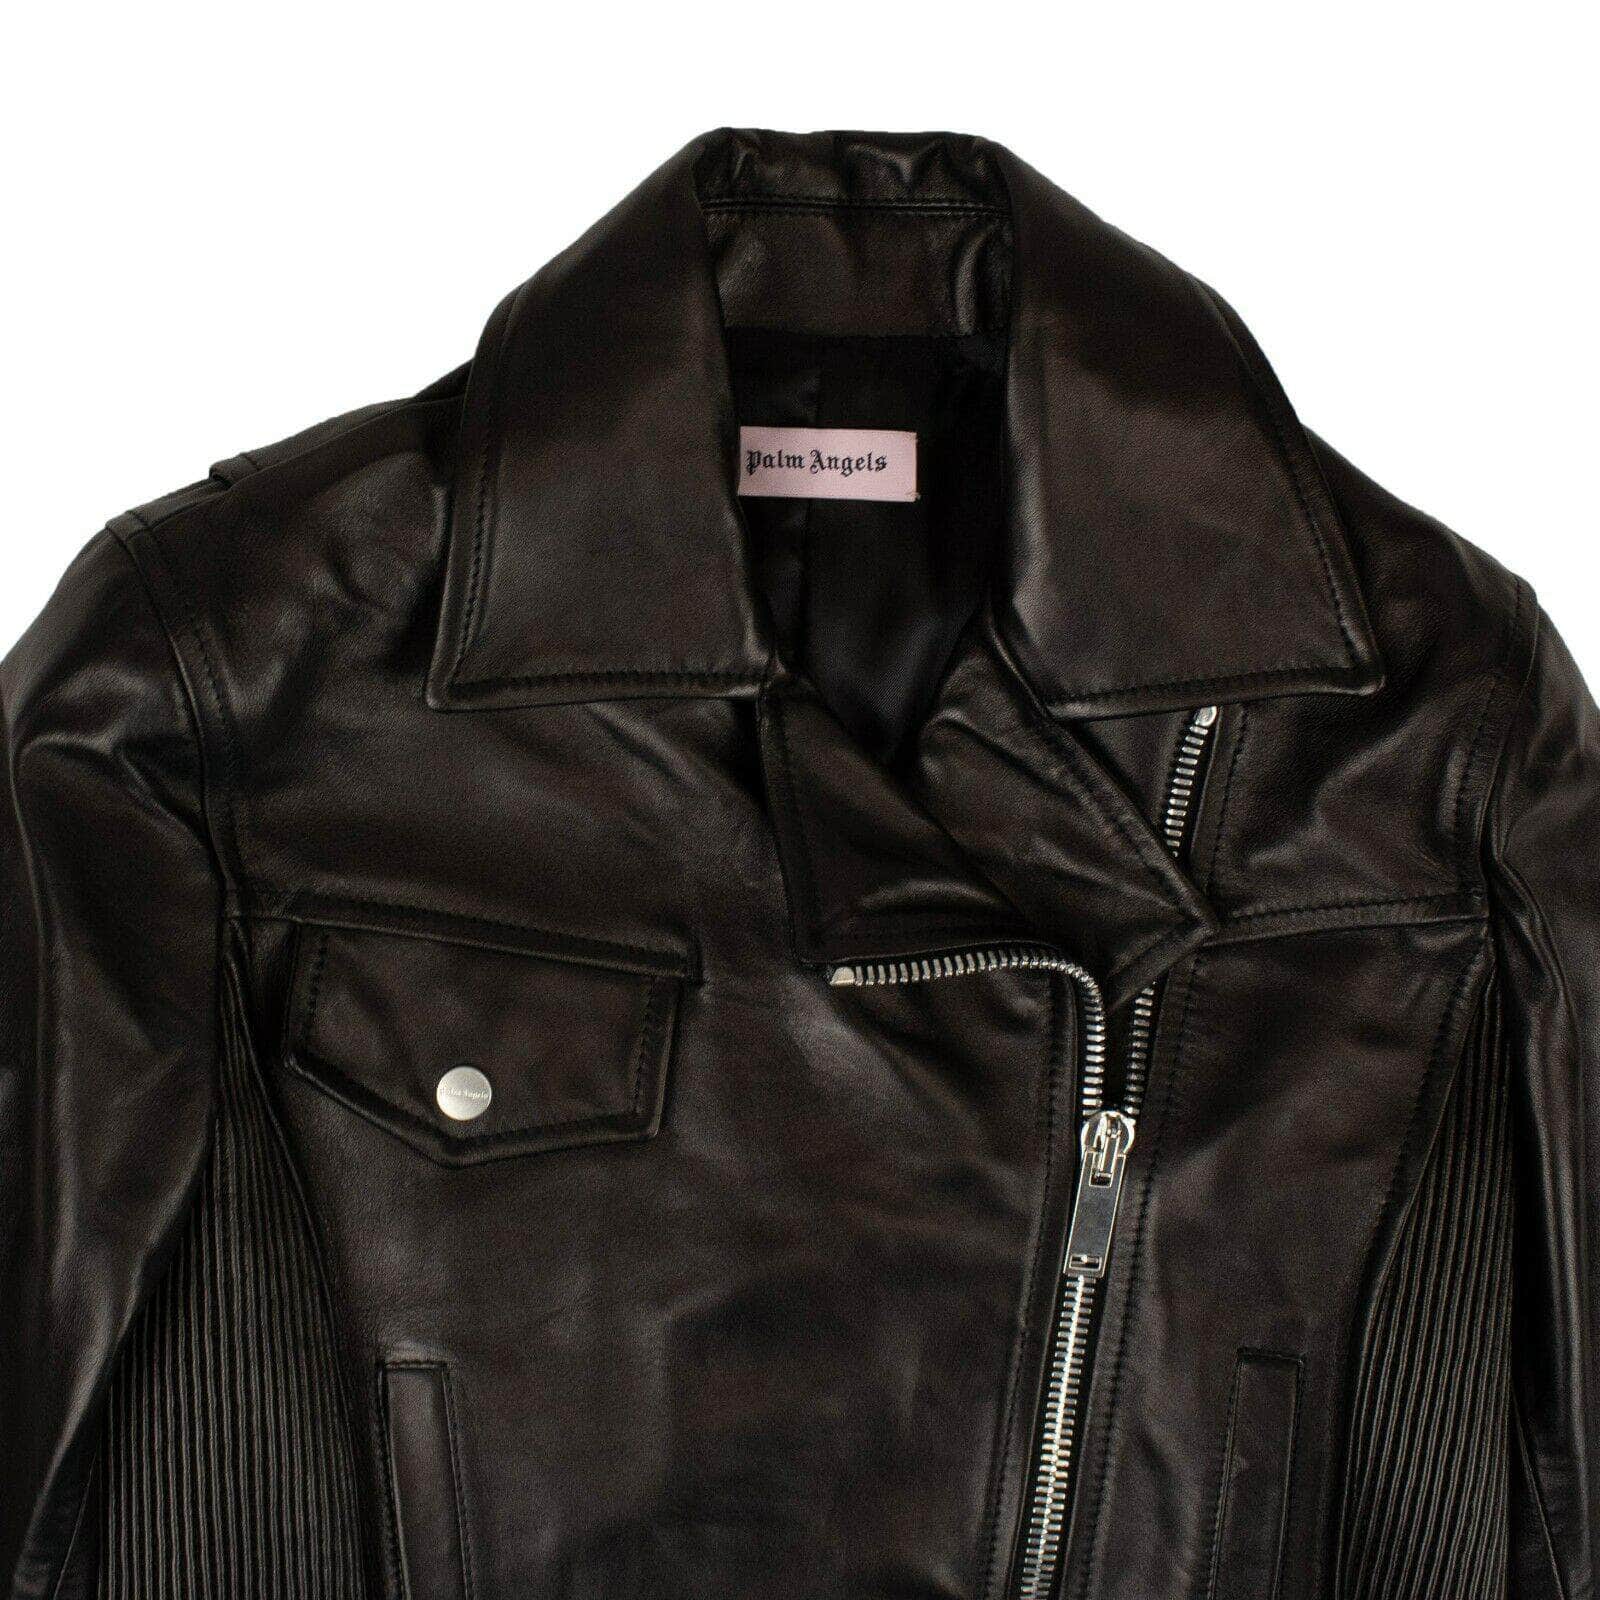 PALM ANGELS 1000-2000, couponcollection, gender-womens, main-clothing, palm-angels, size-40, womens-jackets-blazers 40 Black Leather Biker Jacket 82NGG-PA-33/40 82NGG-PA-33/40